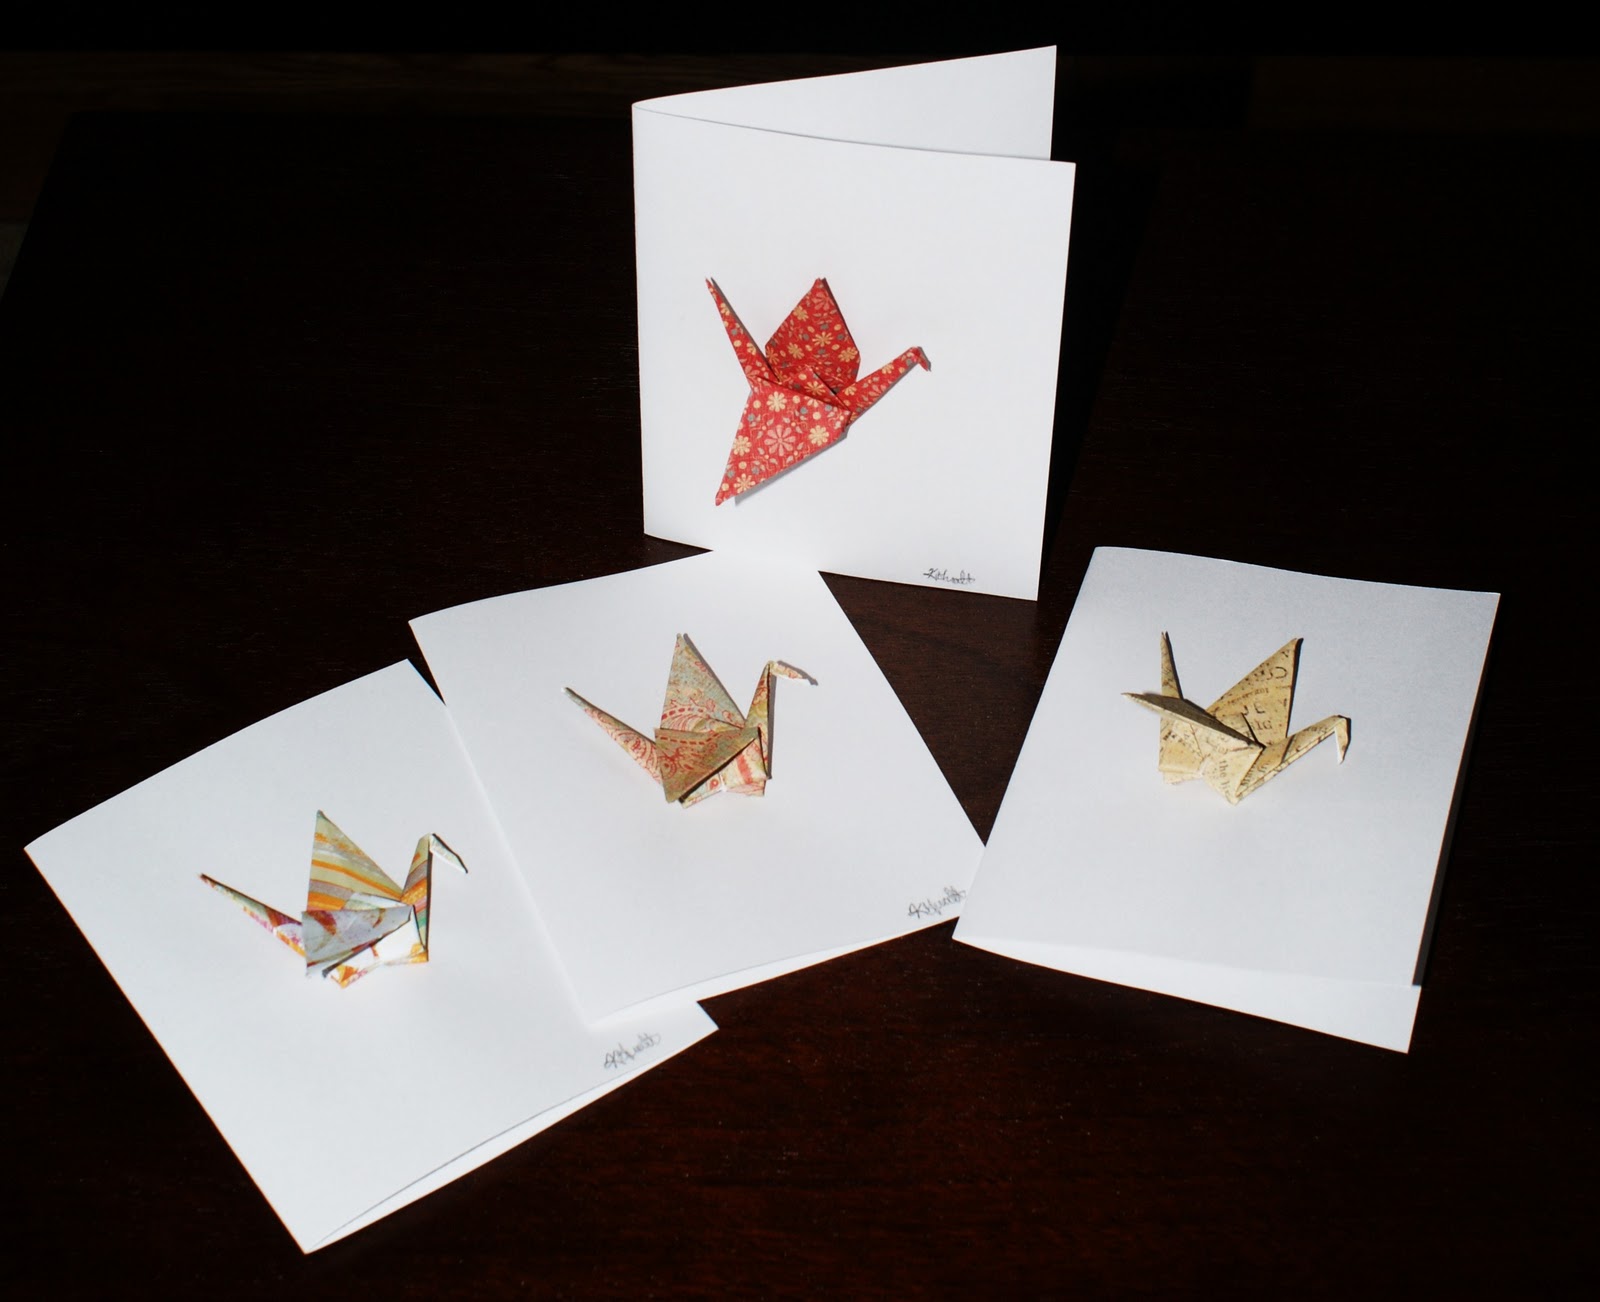 Origami by DecorativeFolds New Origami Crane Cards by Decorativefolds